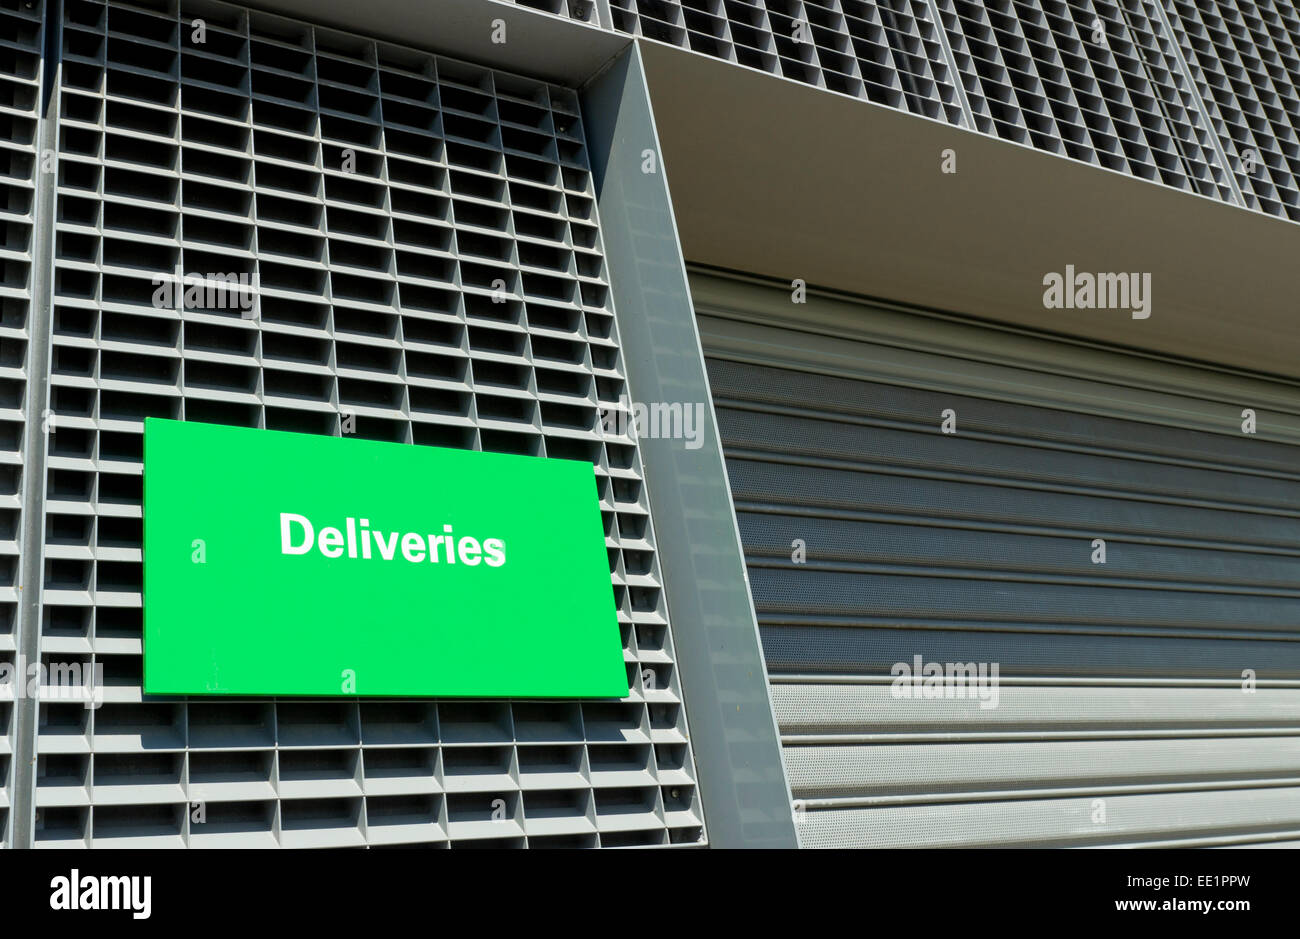 warehouse entrance with green deliveries sign Stock Photo